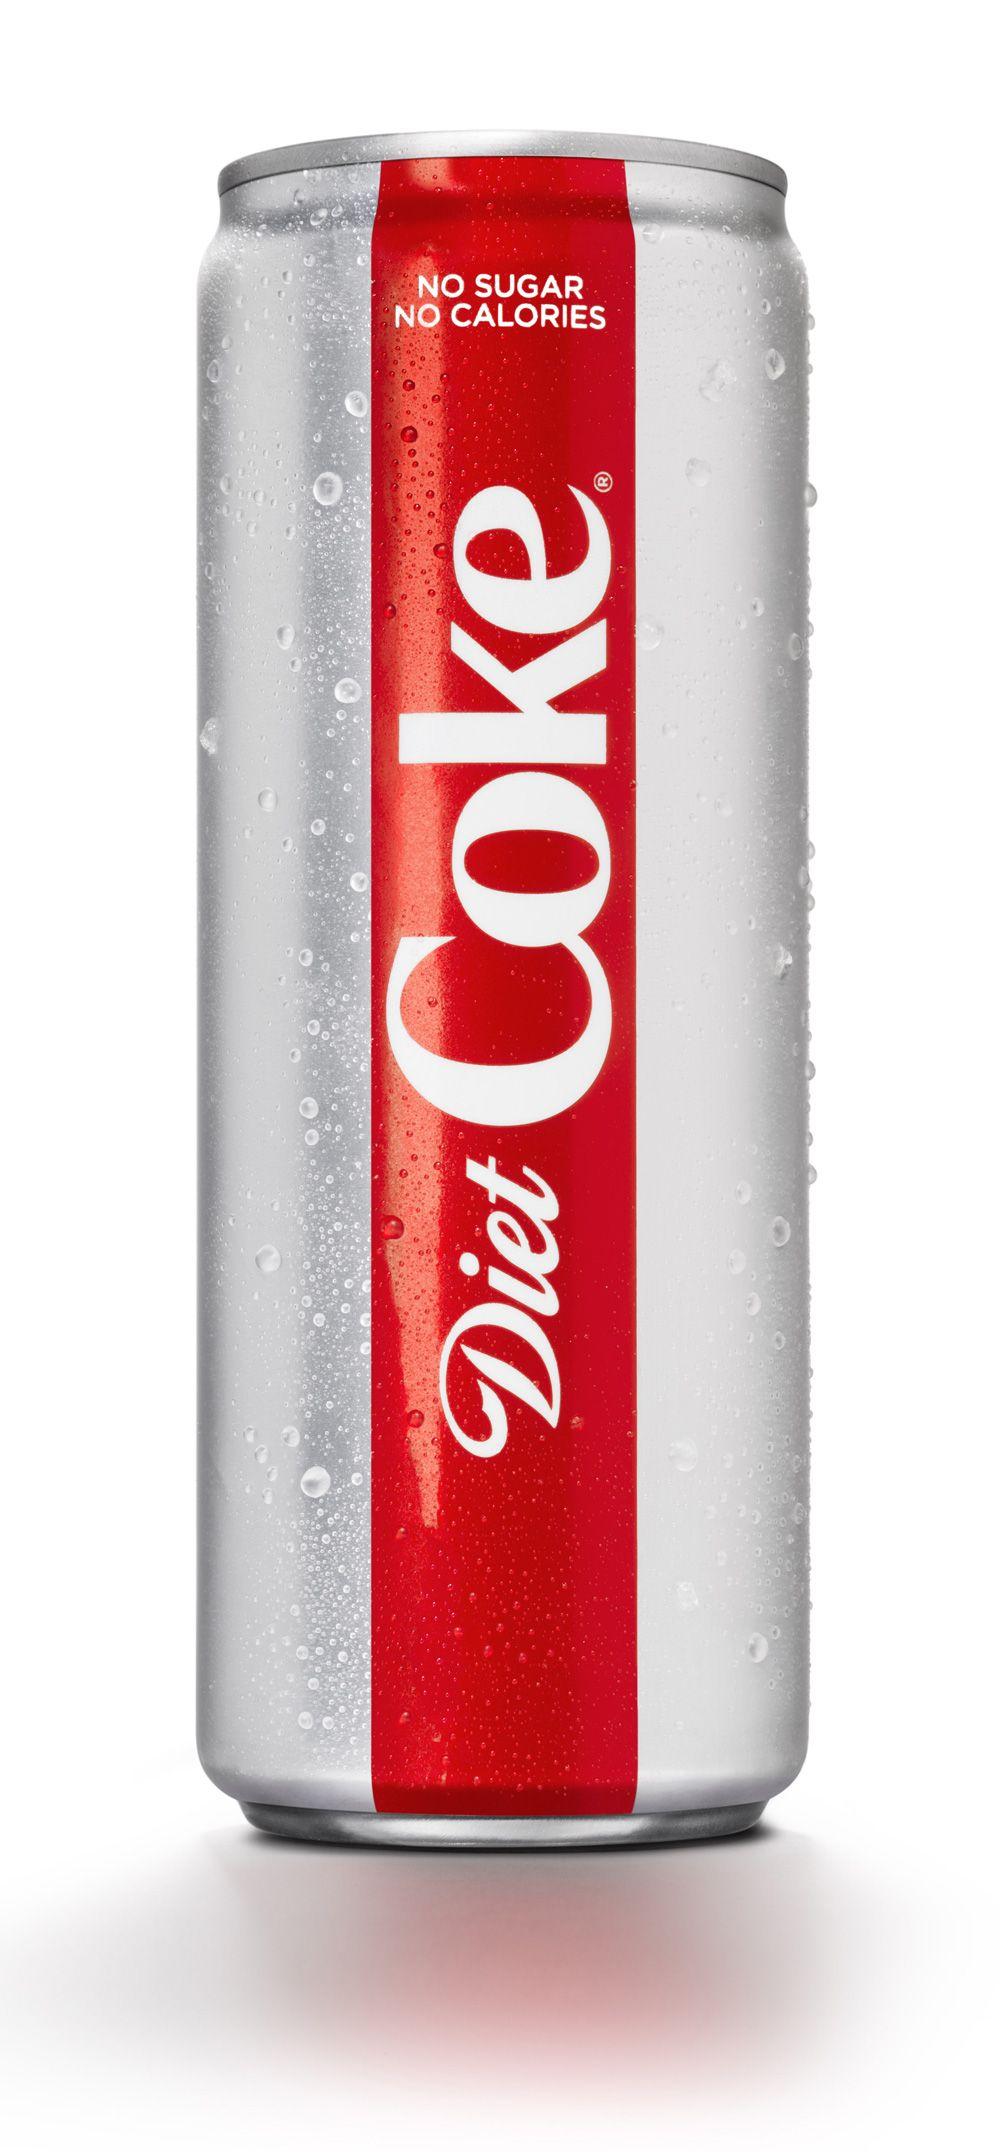 New Coke Logo - Brand New: New Logo and Packaging for Diet Coke done In-house in ...